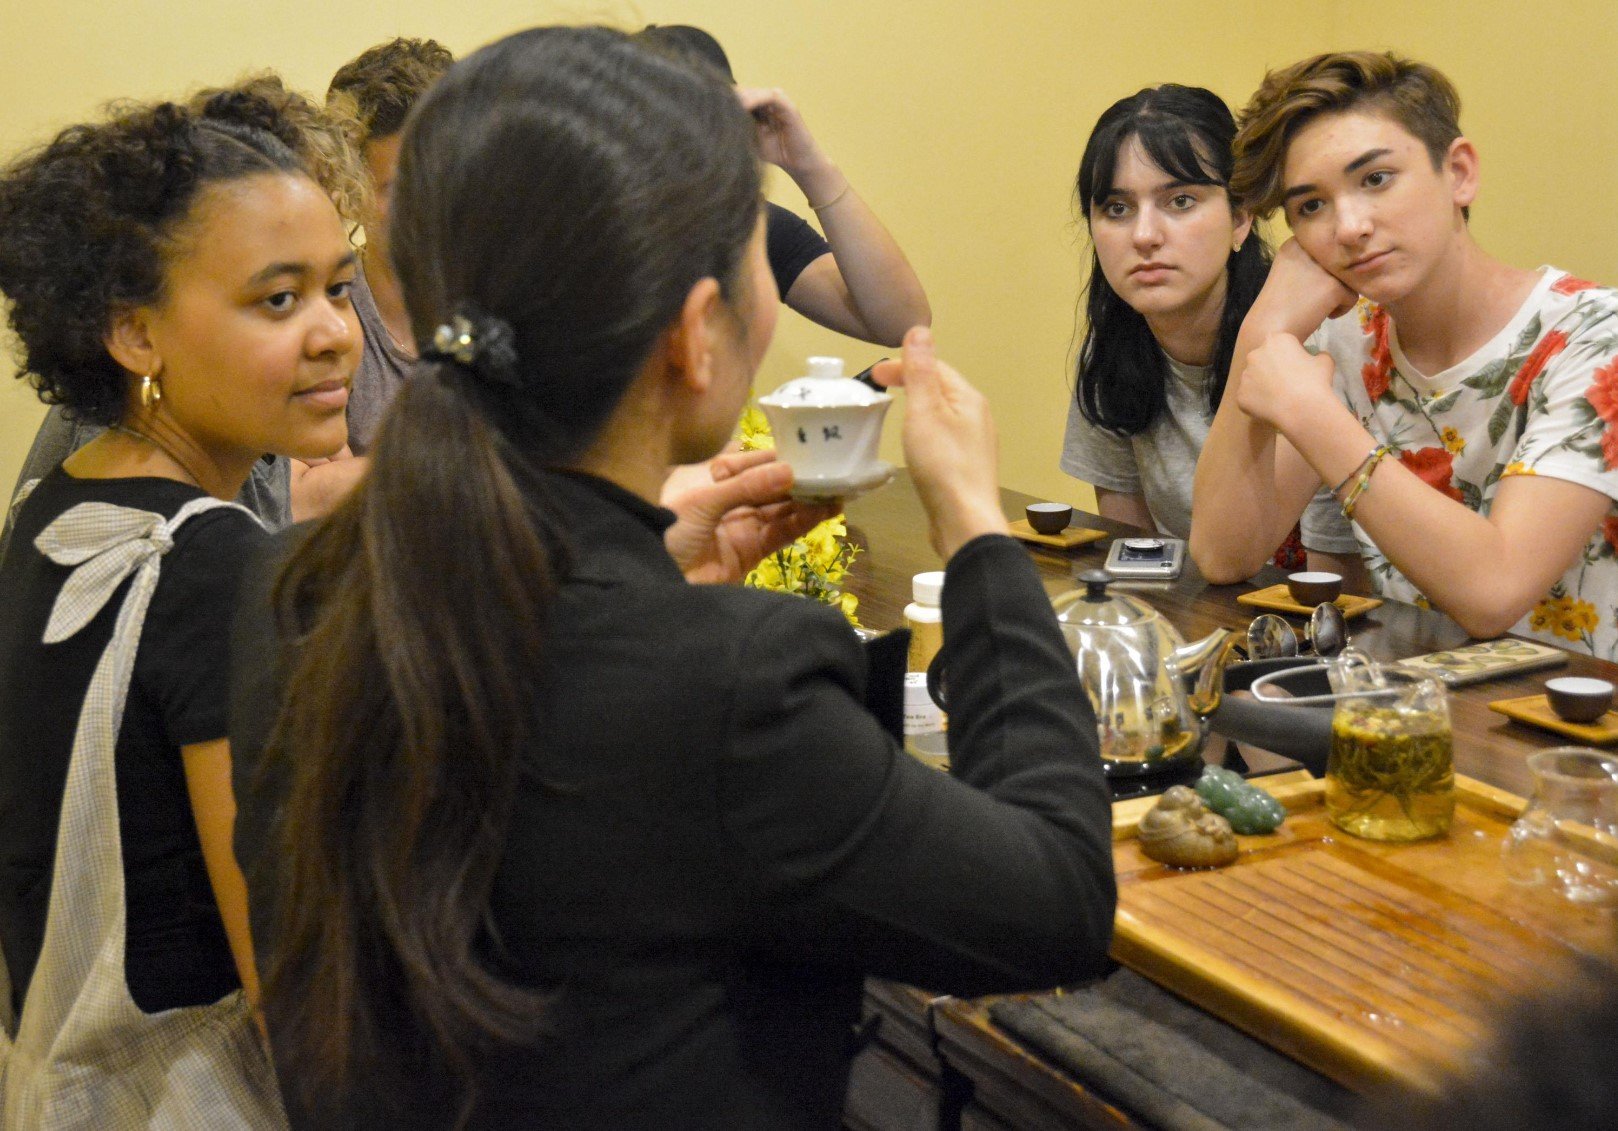 Student Study Tour Group members converse while eating at a table.